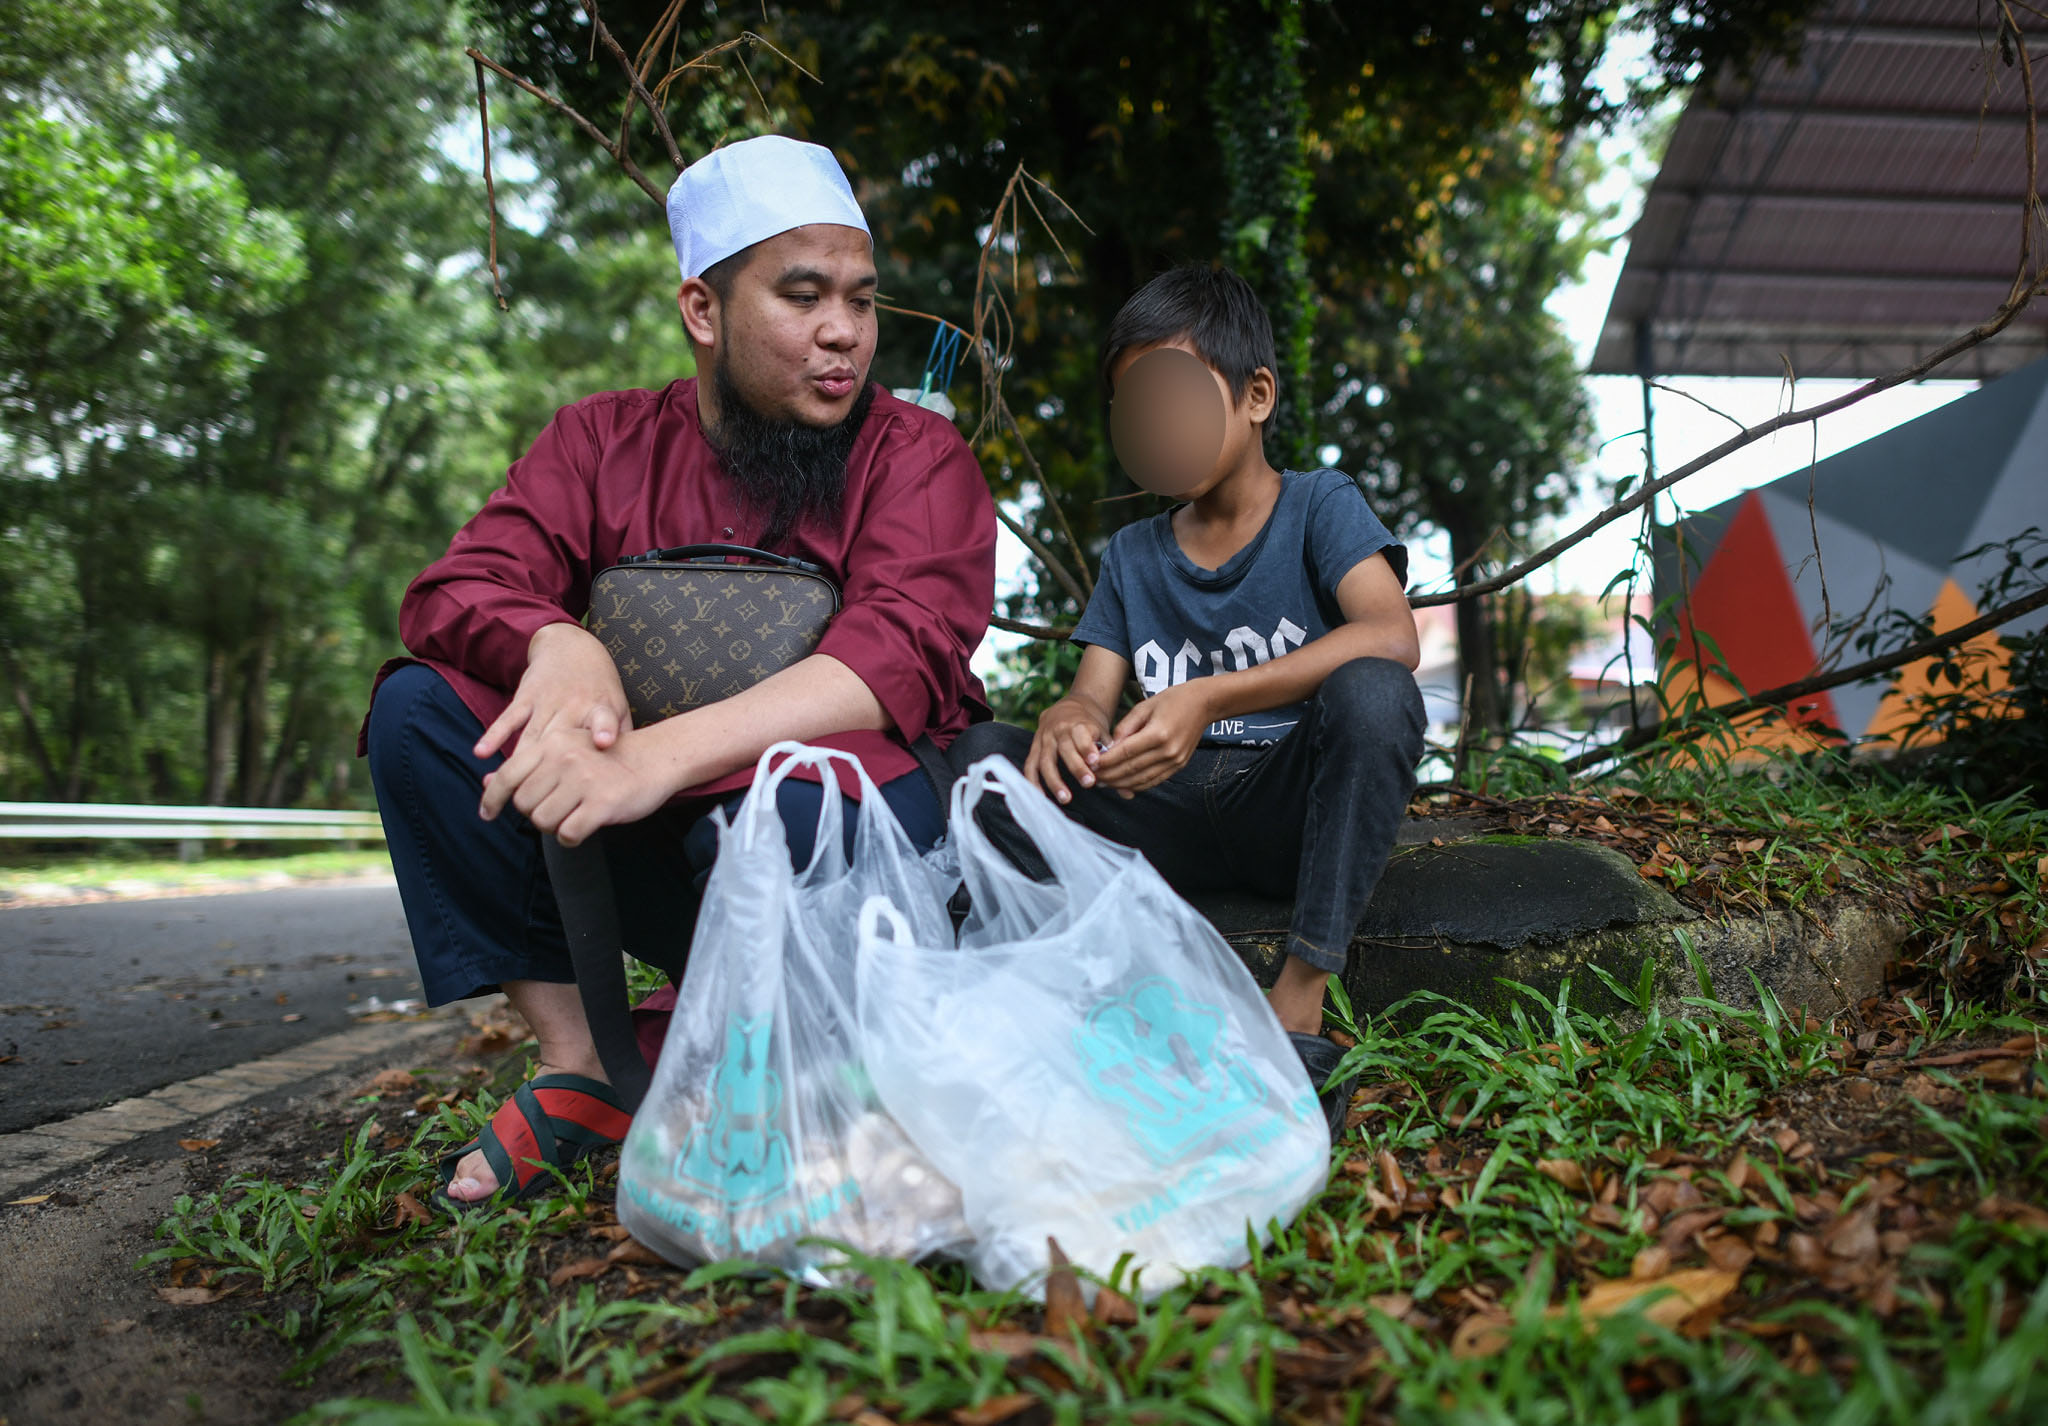 Ebit Lew has since reached out to the young boy who went viral selling mushrooms to offer aid. Image credit: Ebit Lew